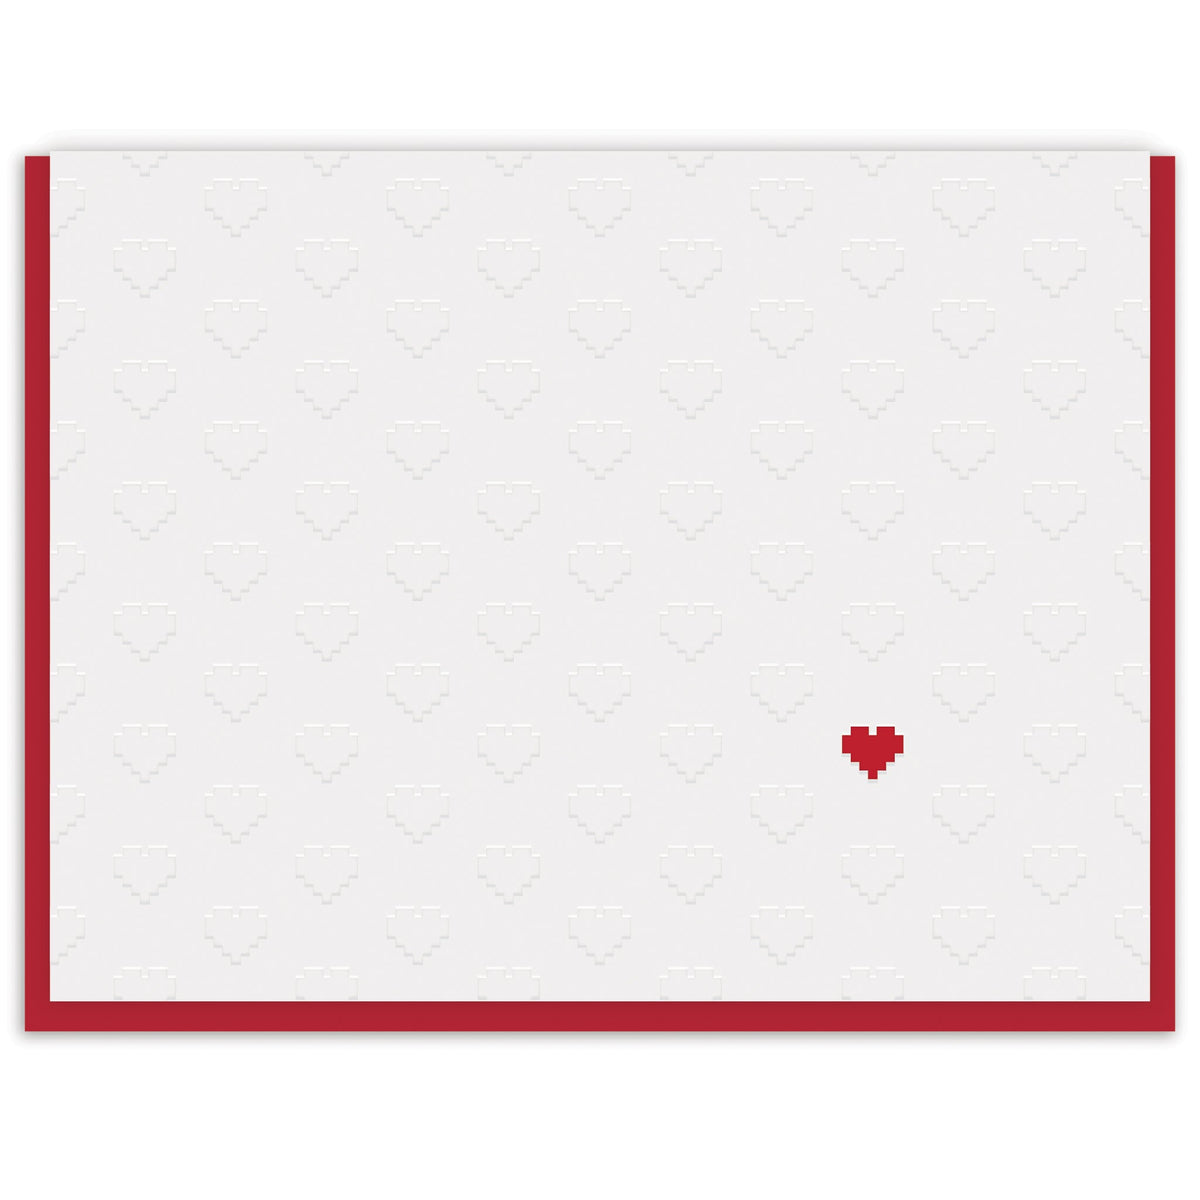 Pixel Perfect Hearts Blank Card - Boxed Set of 6